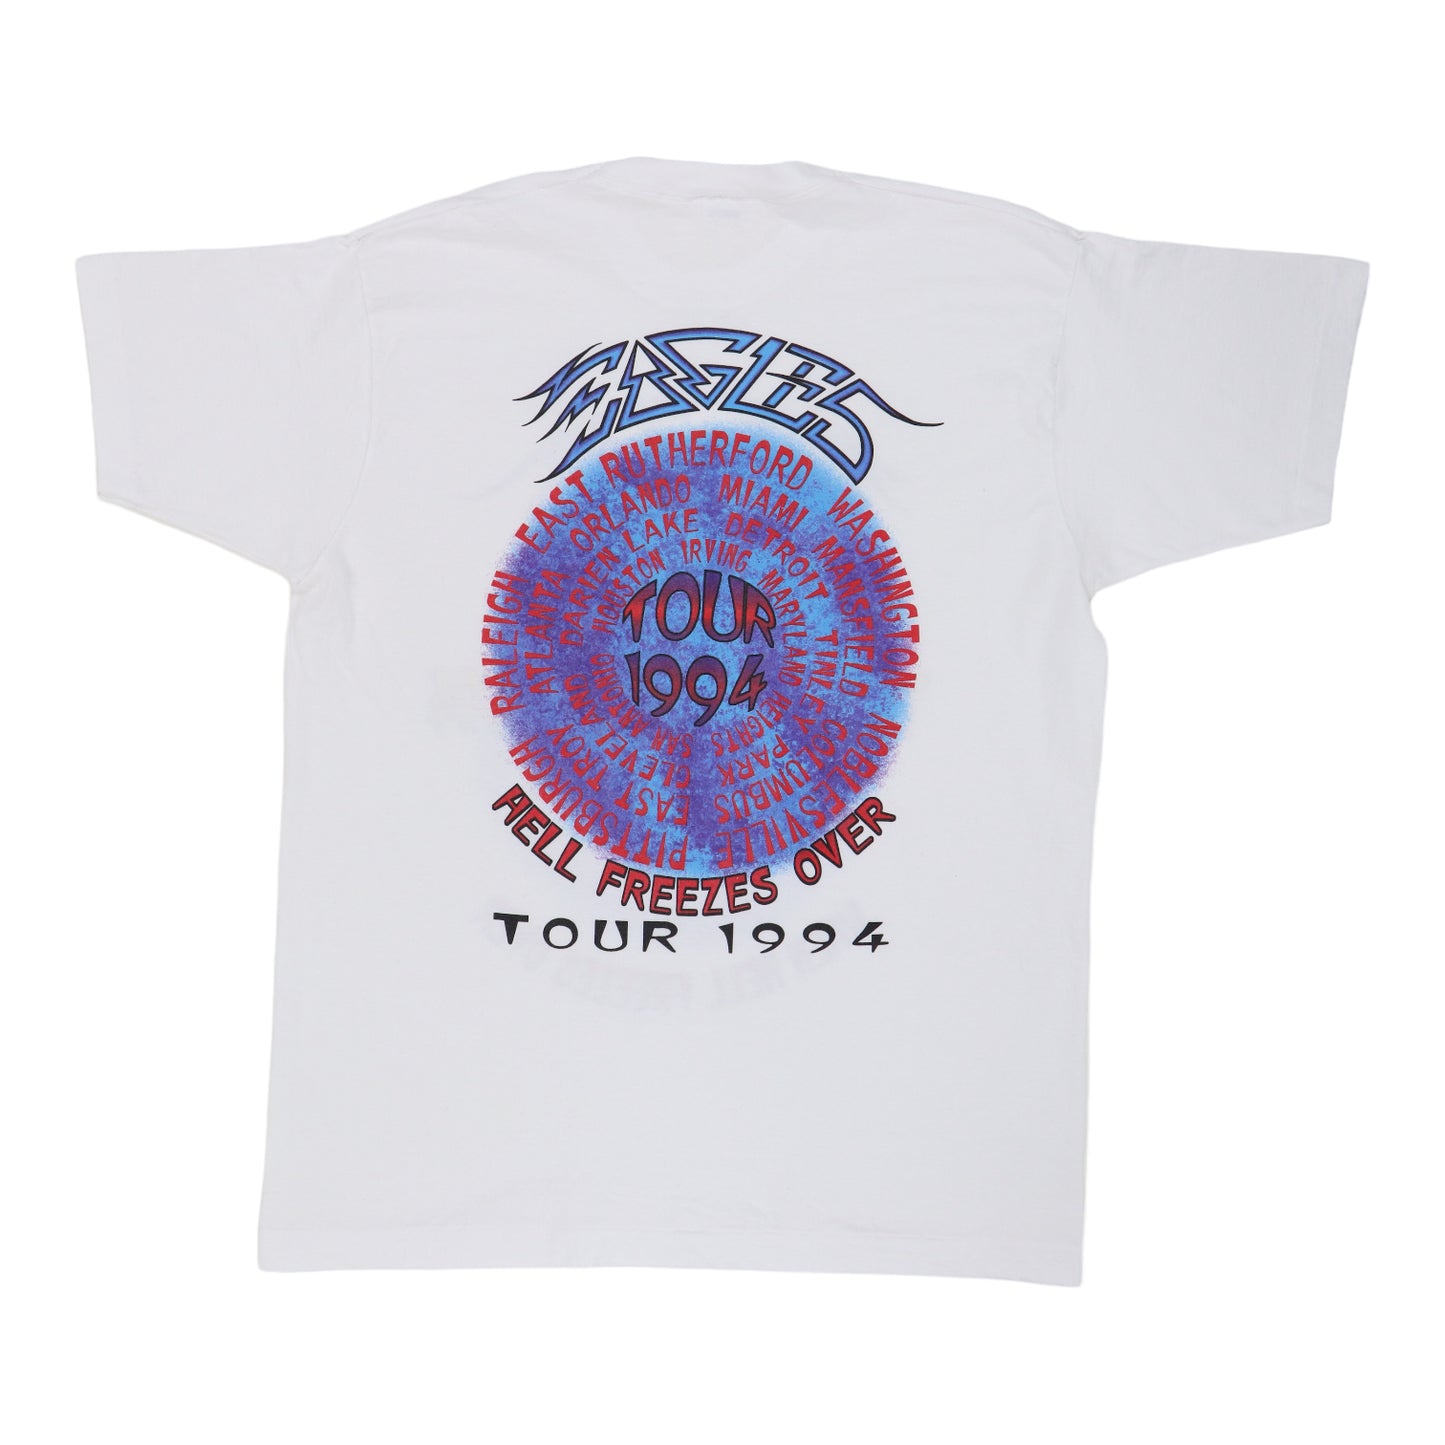 1994 Eagles When Hell Freezes Over Tour Shirt